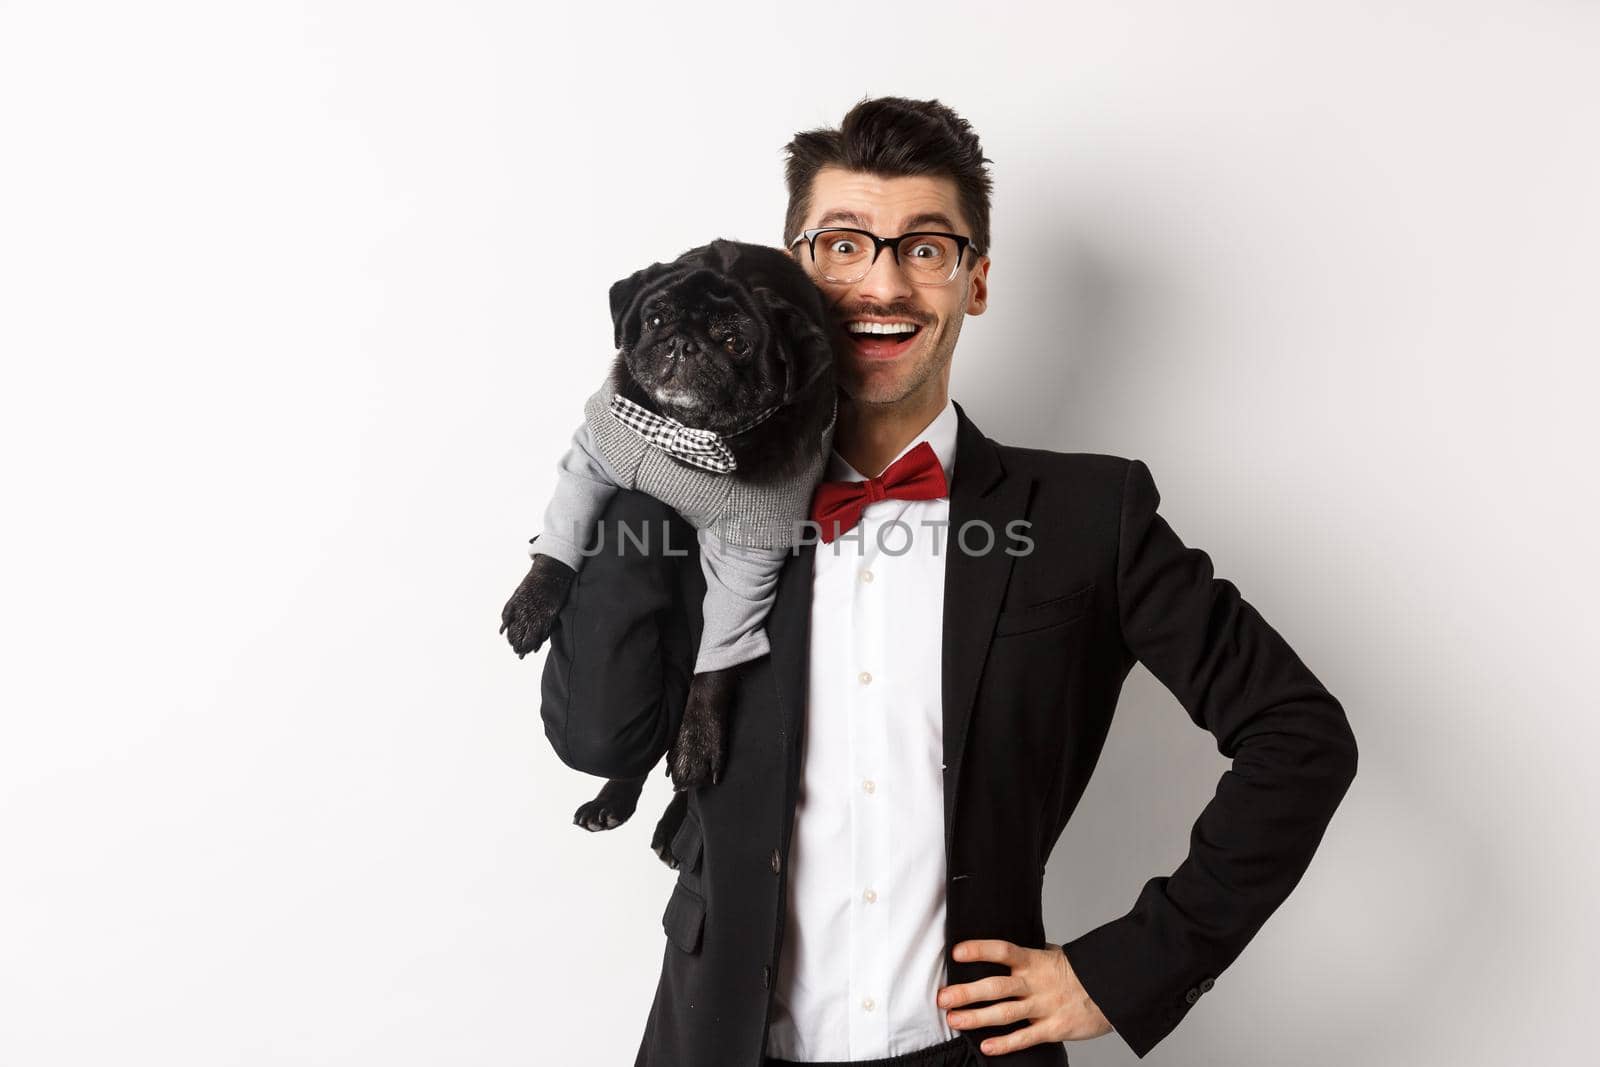 Handsome young man in suit and glasses holding cute black pug dog on shoulder, smiling happy at camera, wearing party outfits, white background.